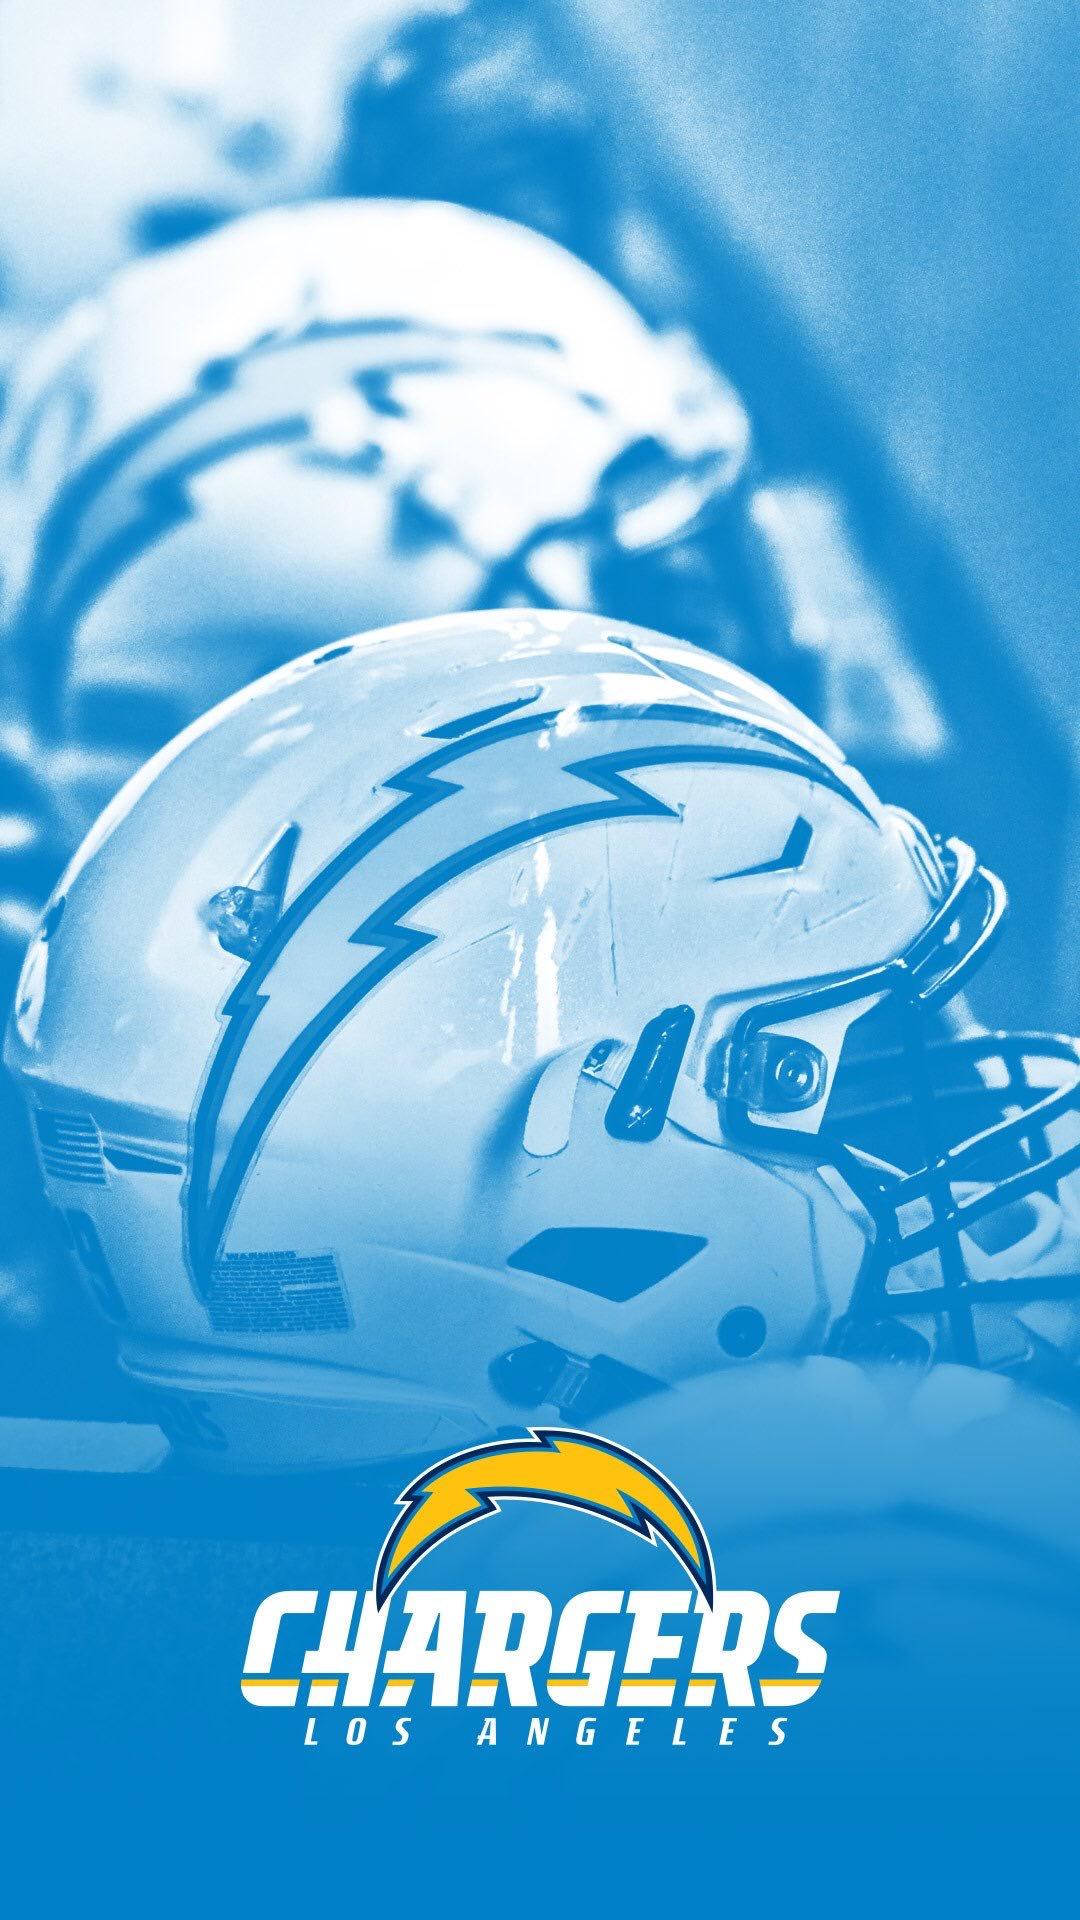 Background Chargers Wallpaper Discover more American Chargers Football  Los Angeles Metropol  Los angeles chargers Los angeles chargers logo  La chargers logo